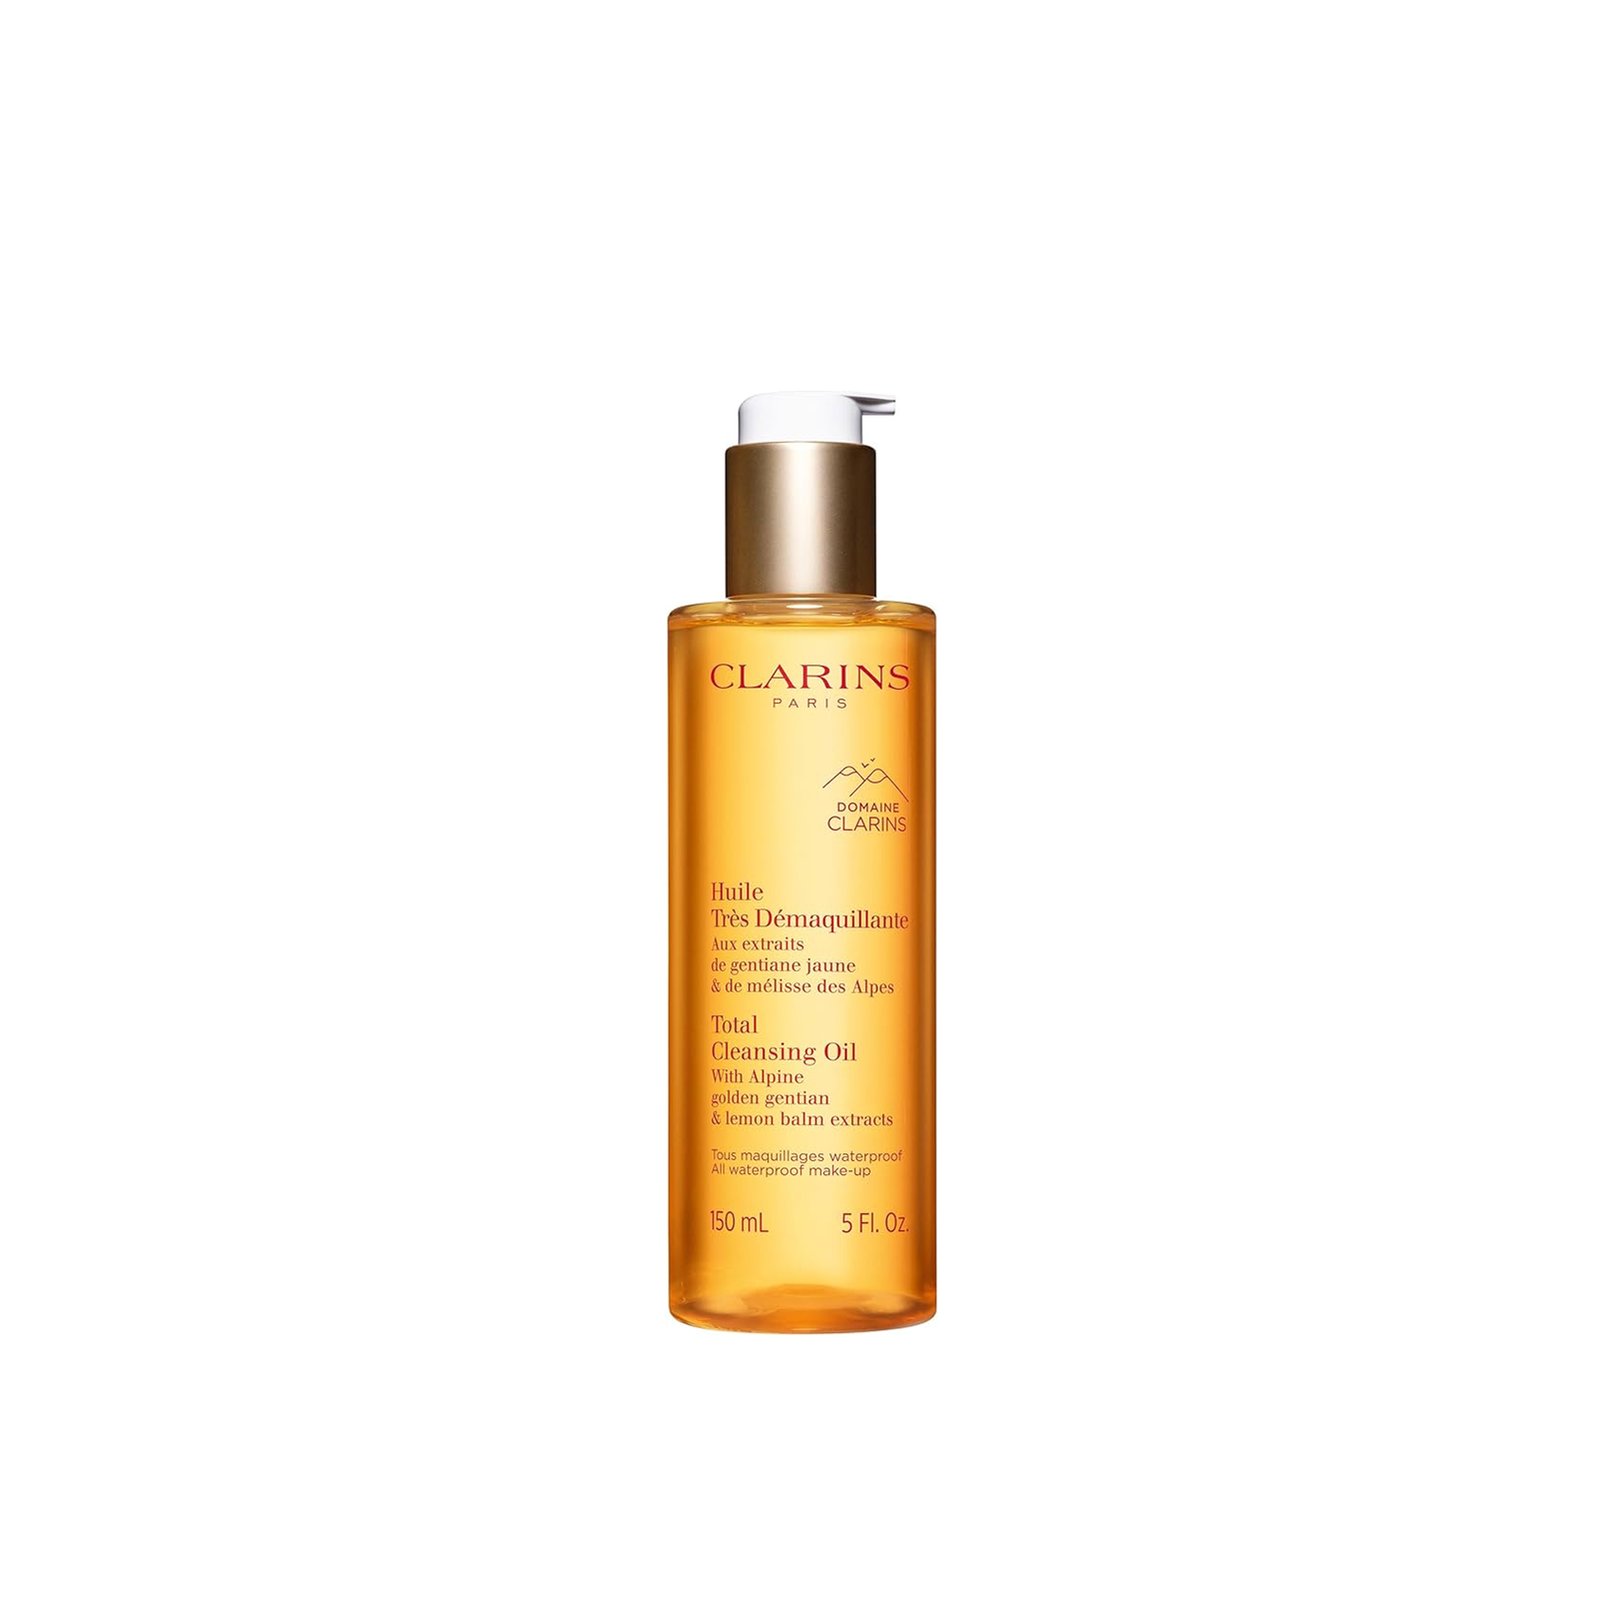 Clarins Total Cleansing Oil 150ml (5floz)